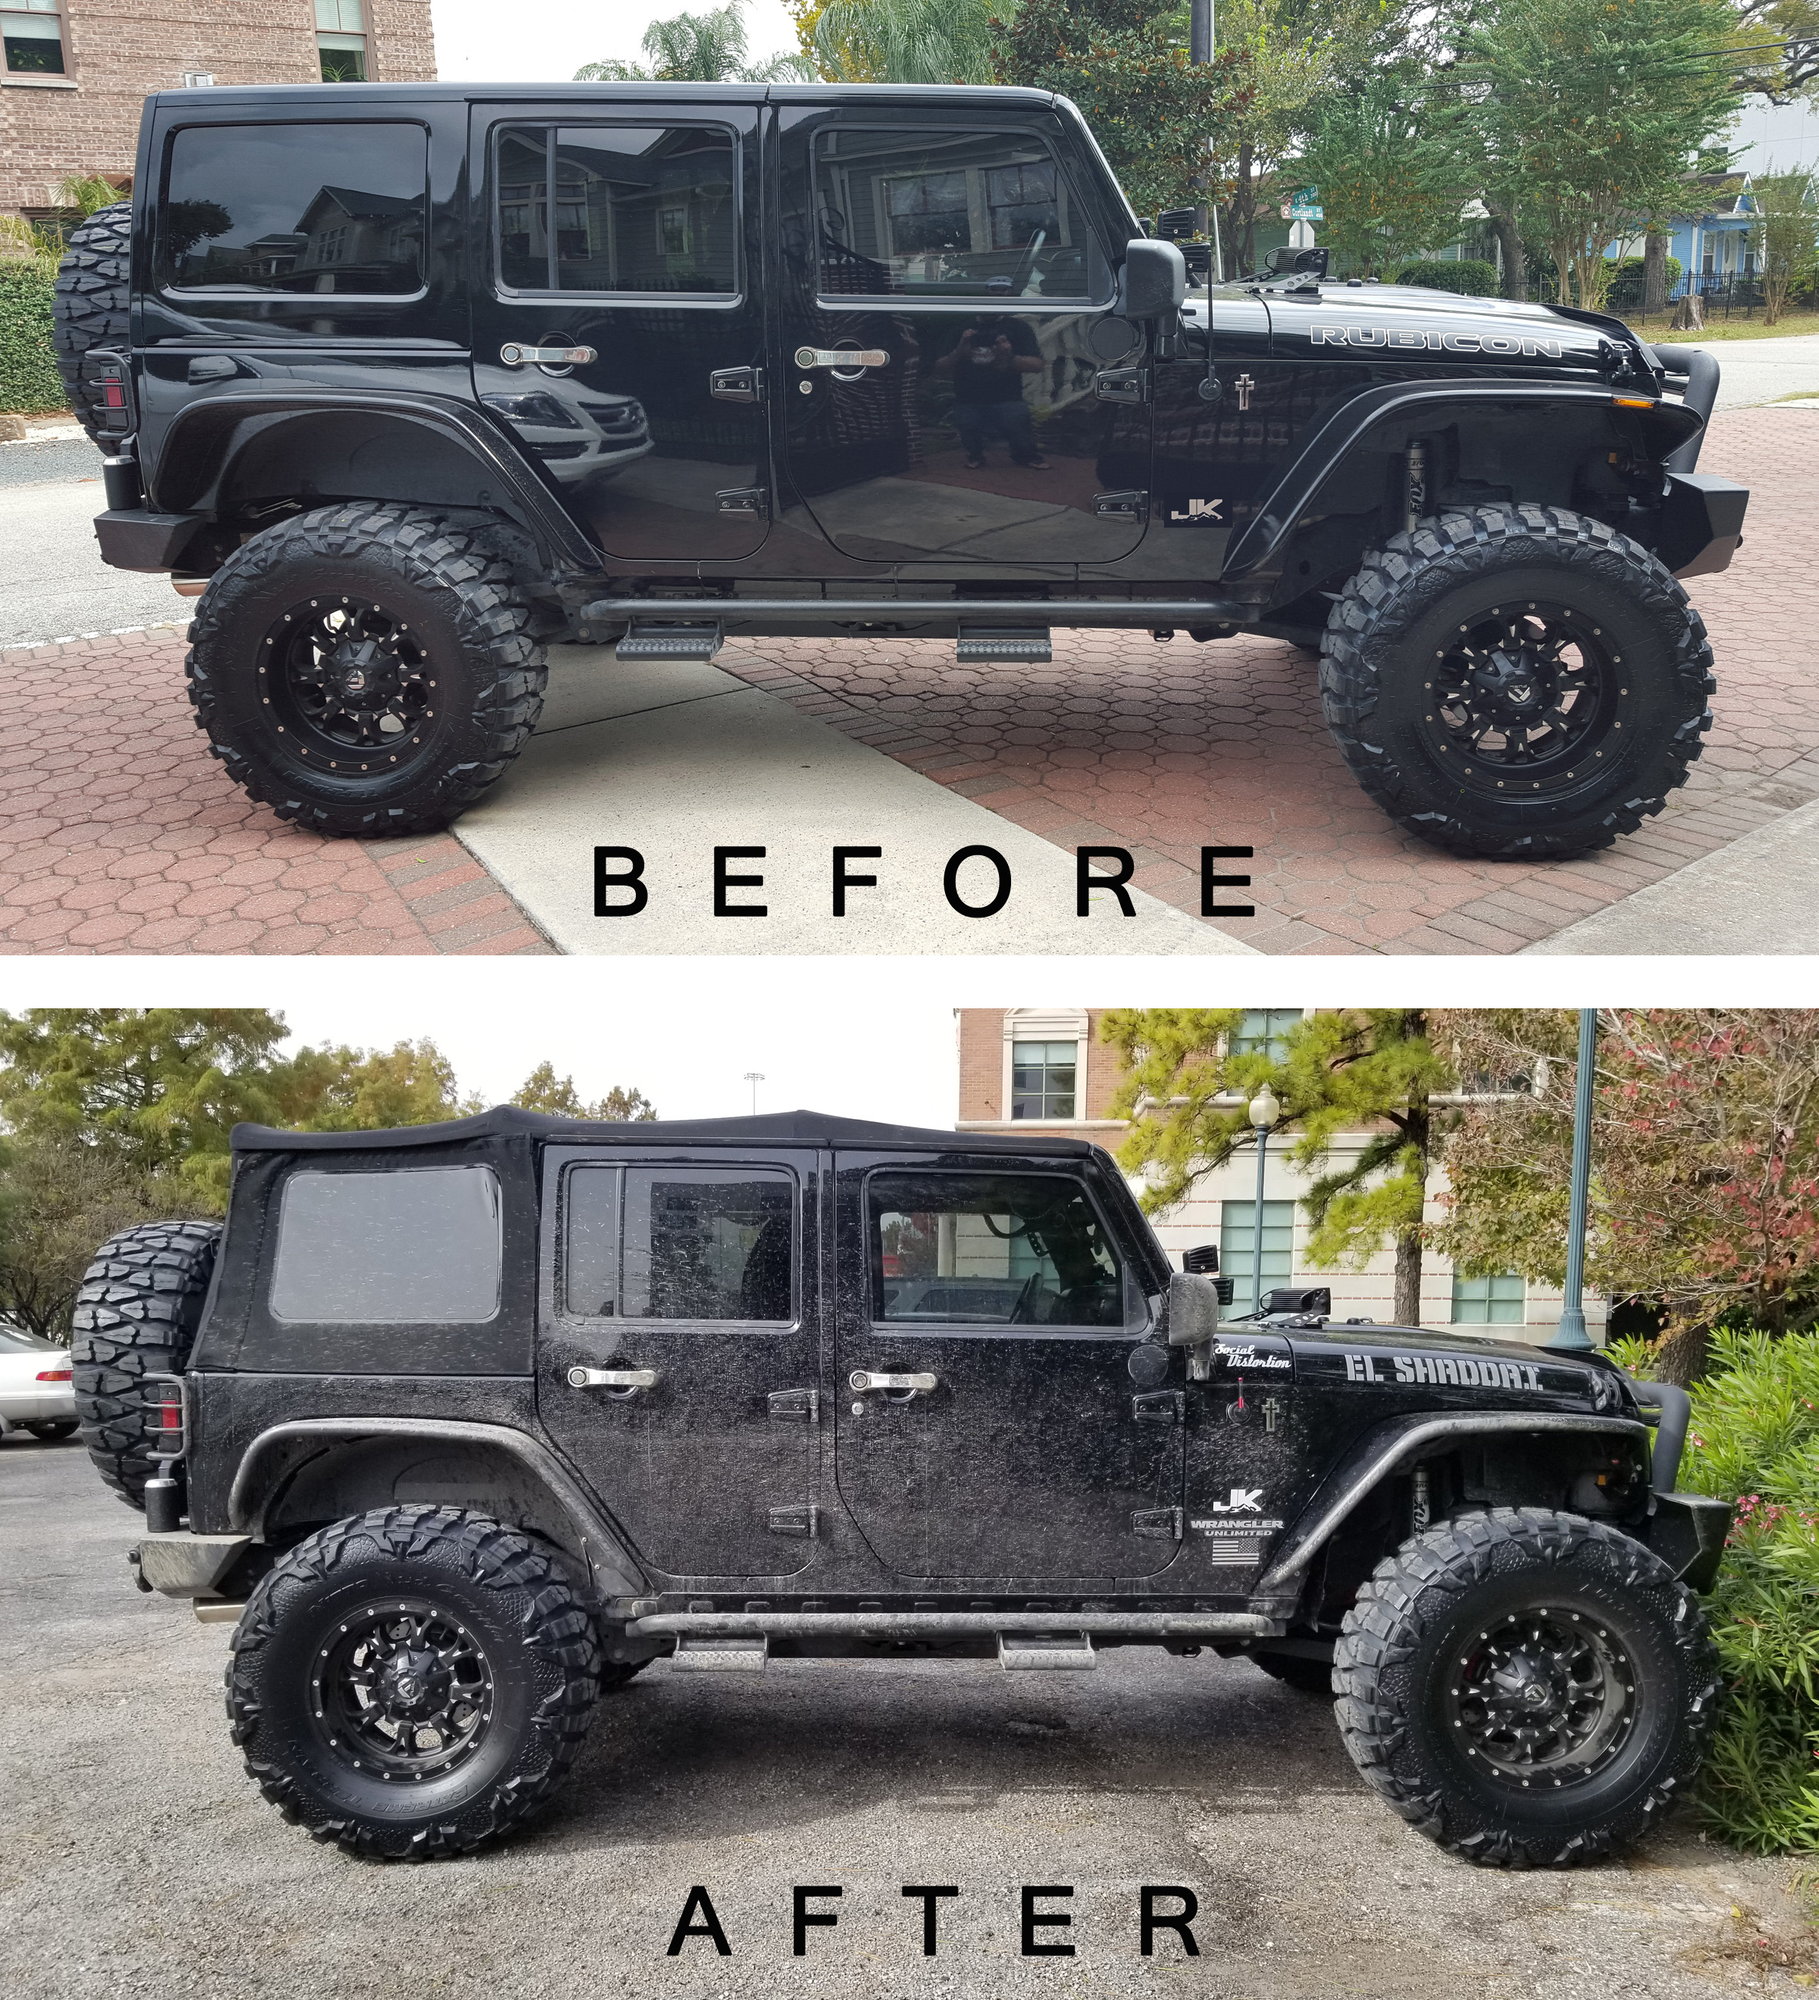 35 inch vs 37 inch tires - Page 8  - The top destination for Jeep  JK and JL Wrangler news, rumors, and discussion